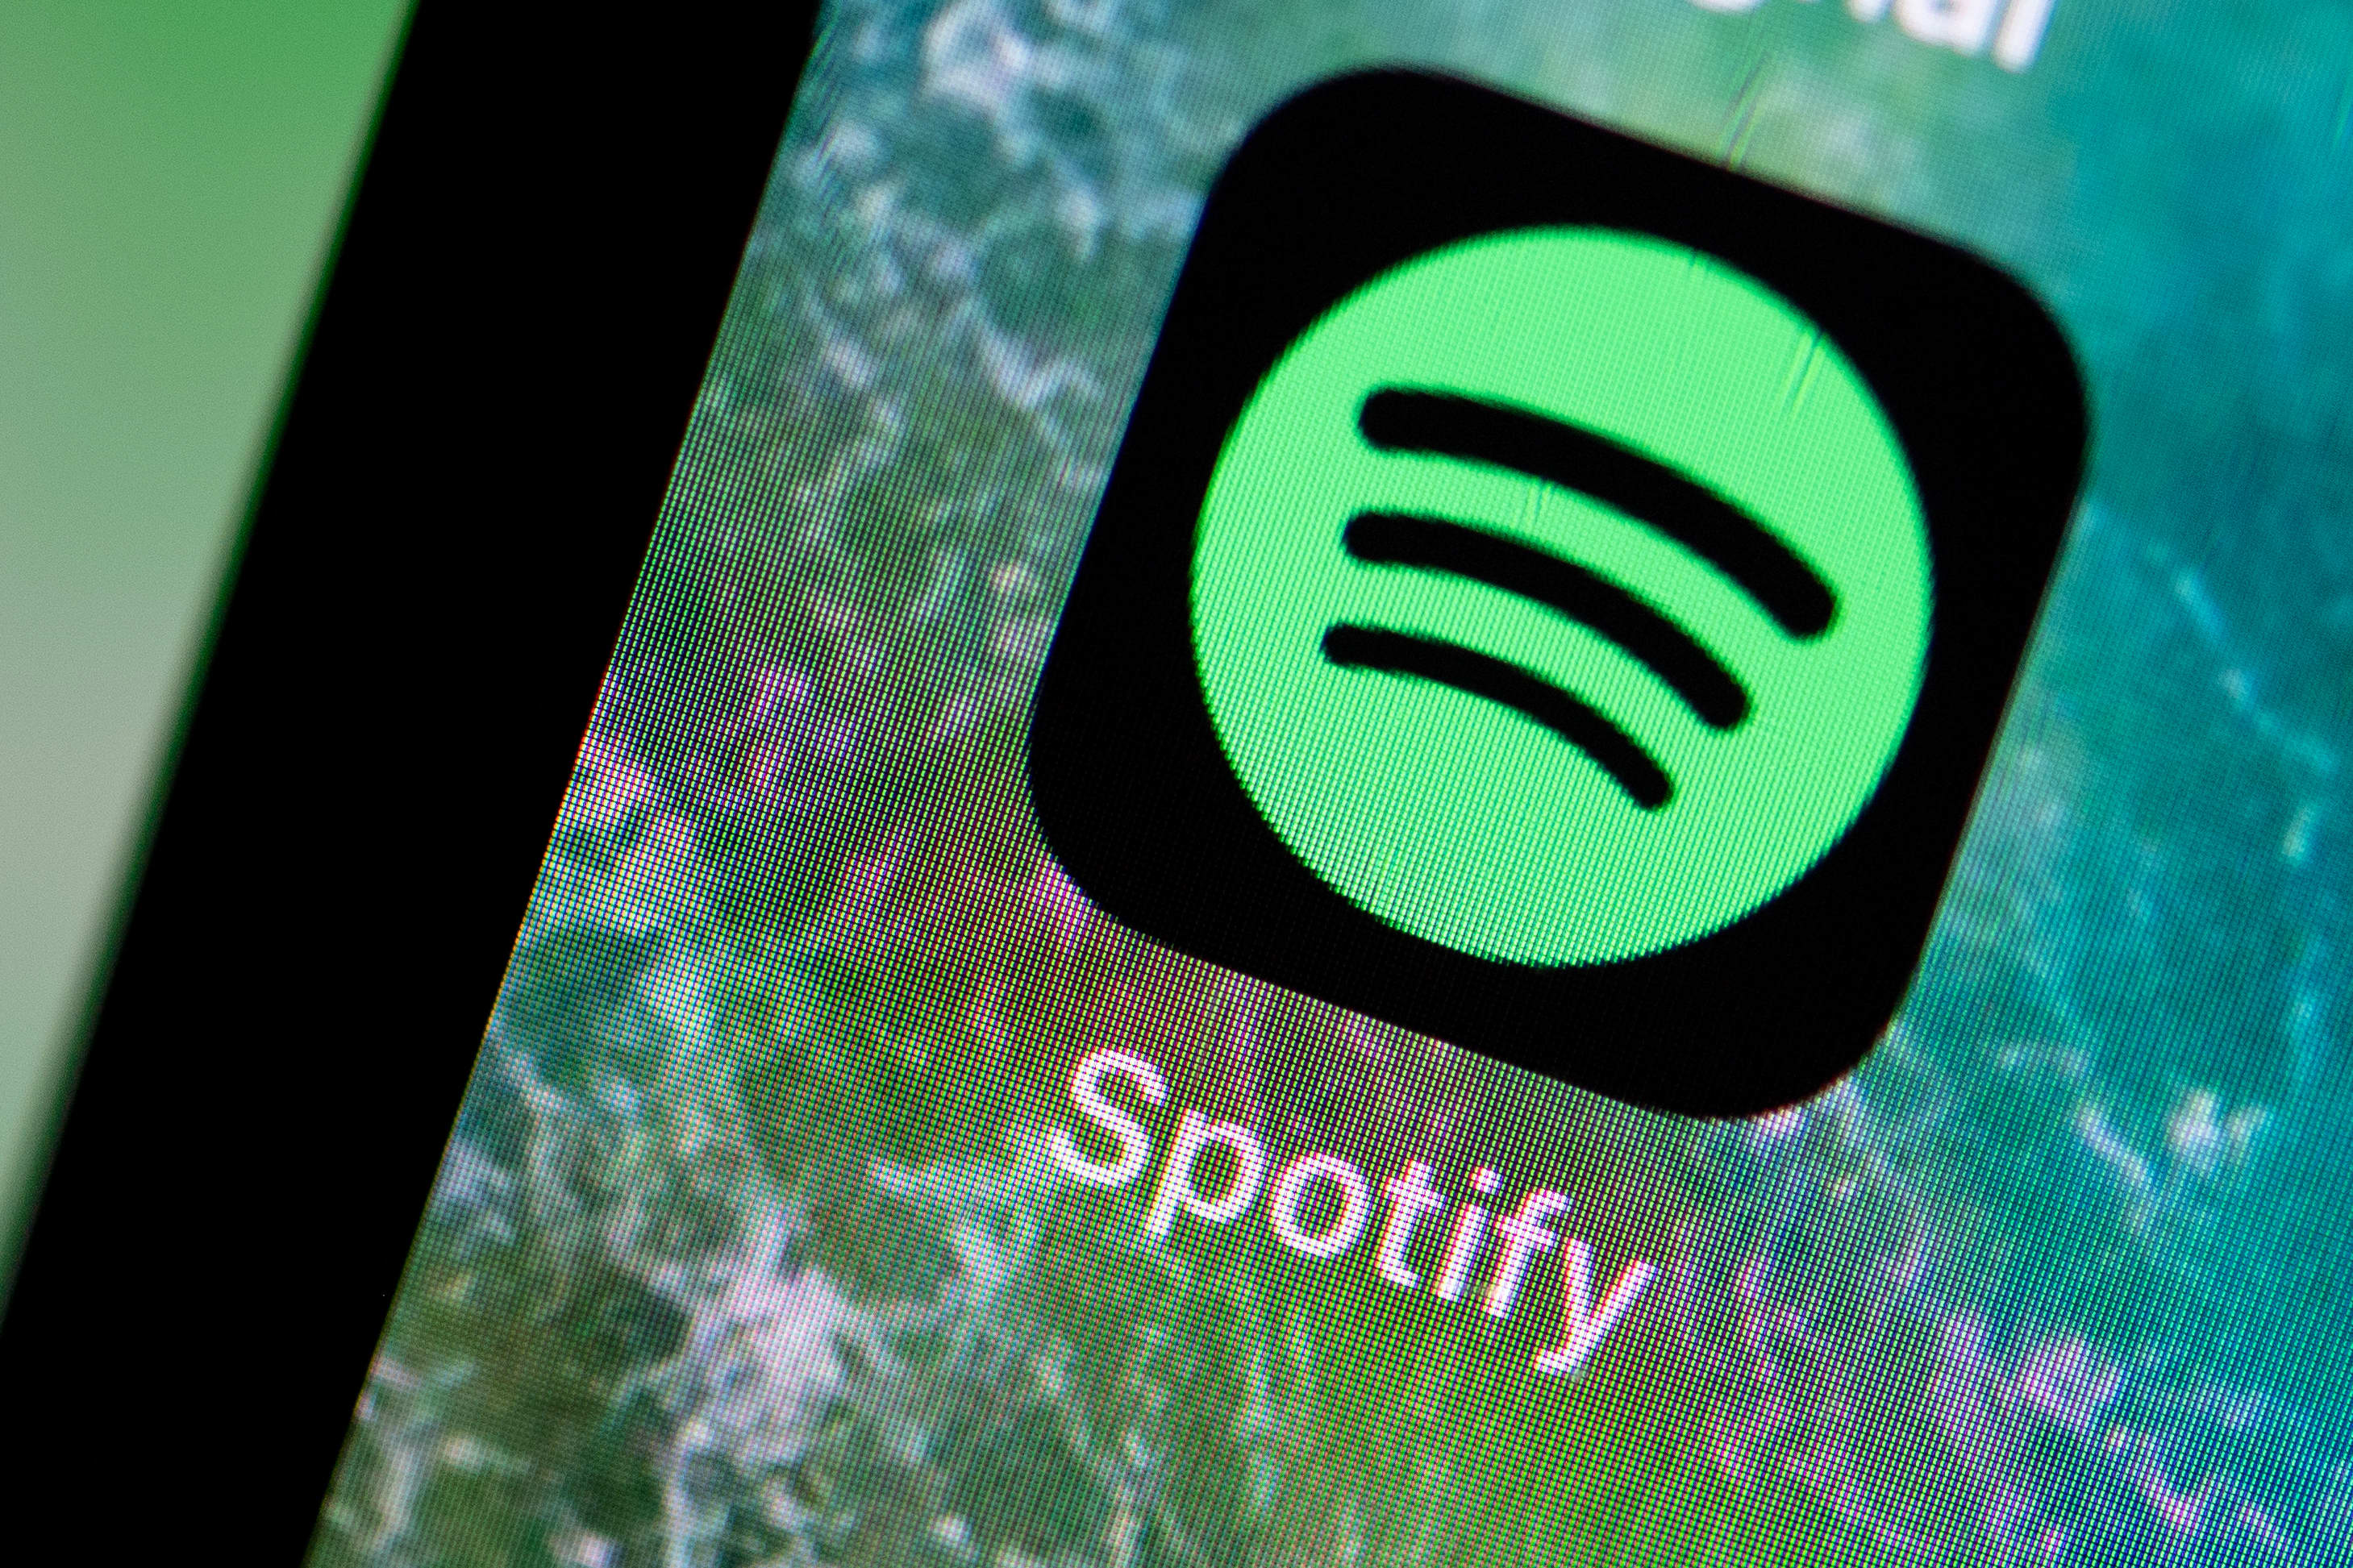 How Spotify hopes to win the podcasting wars